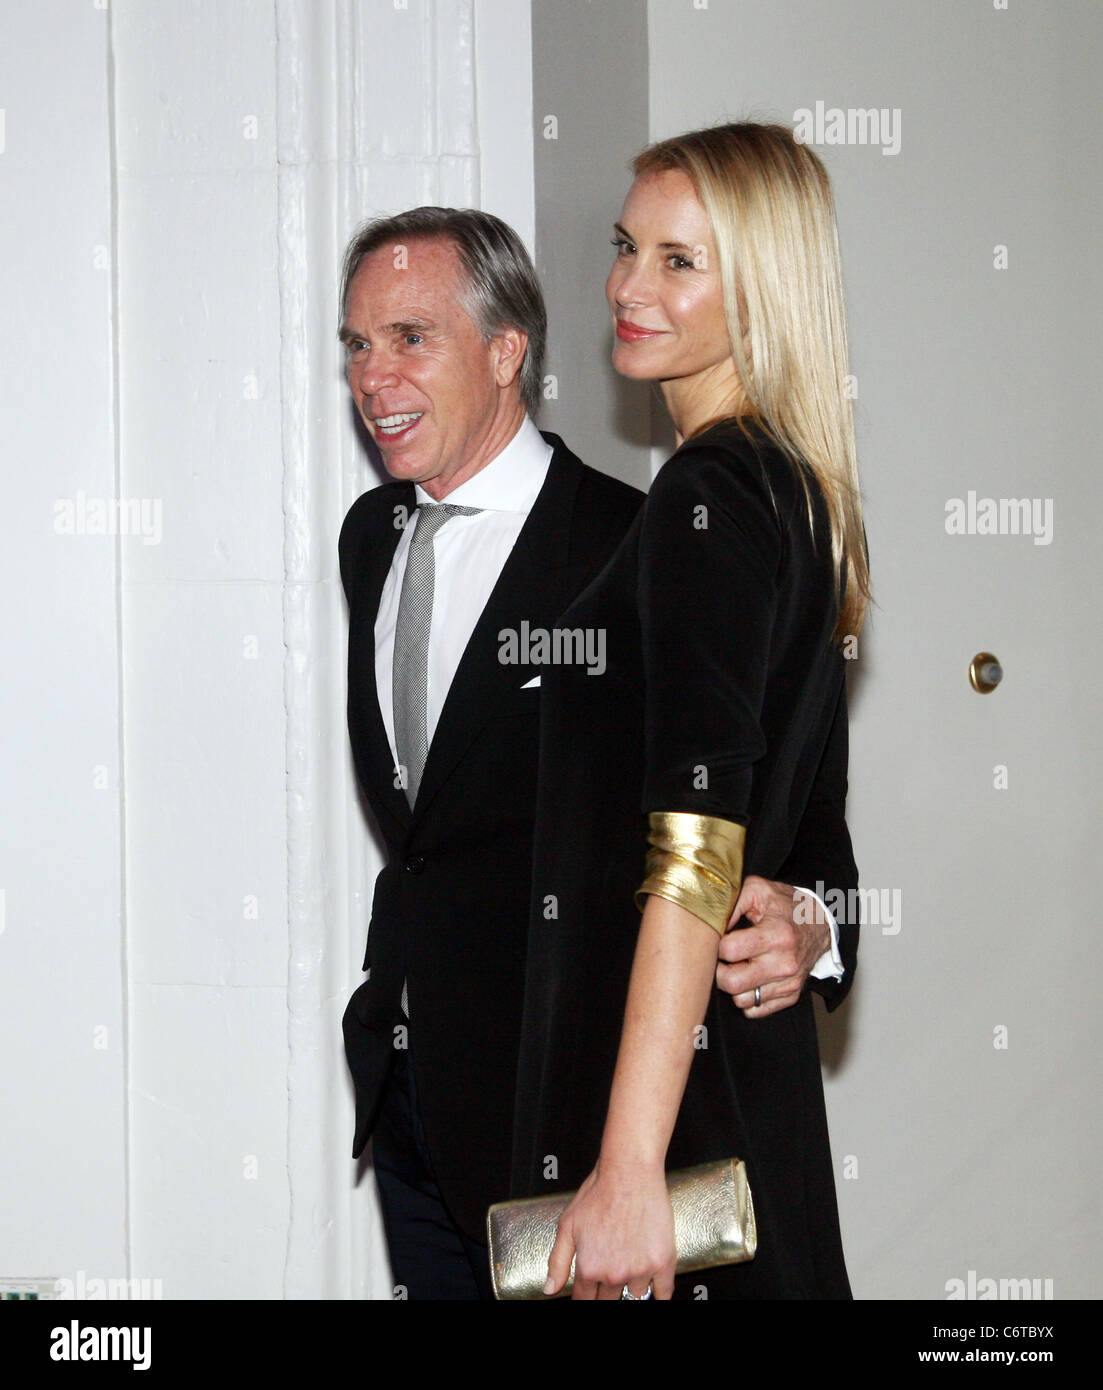 Tommy Hilfiger & Wife Dee Ocleppo at The 32nd Annual AAFA American ...